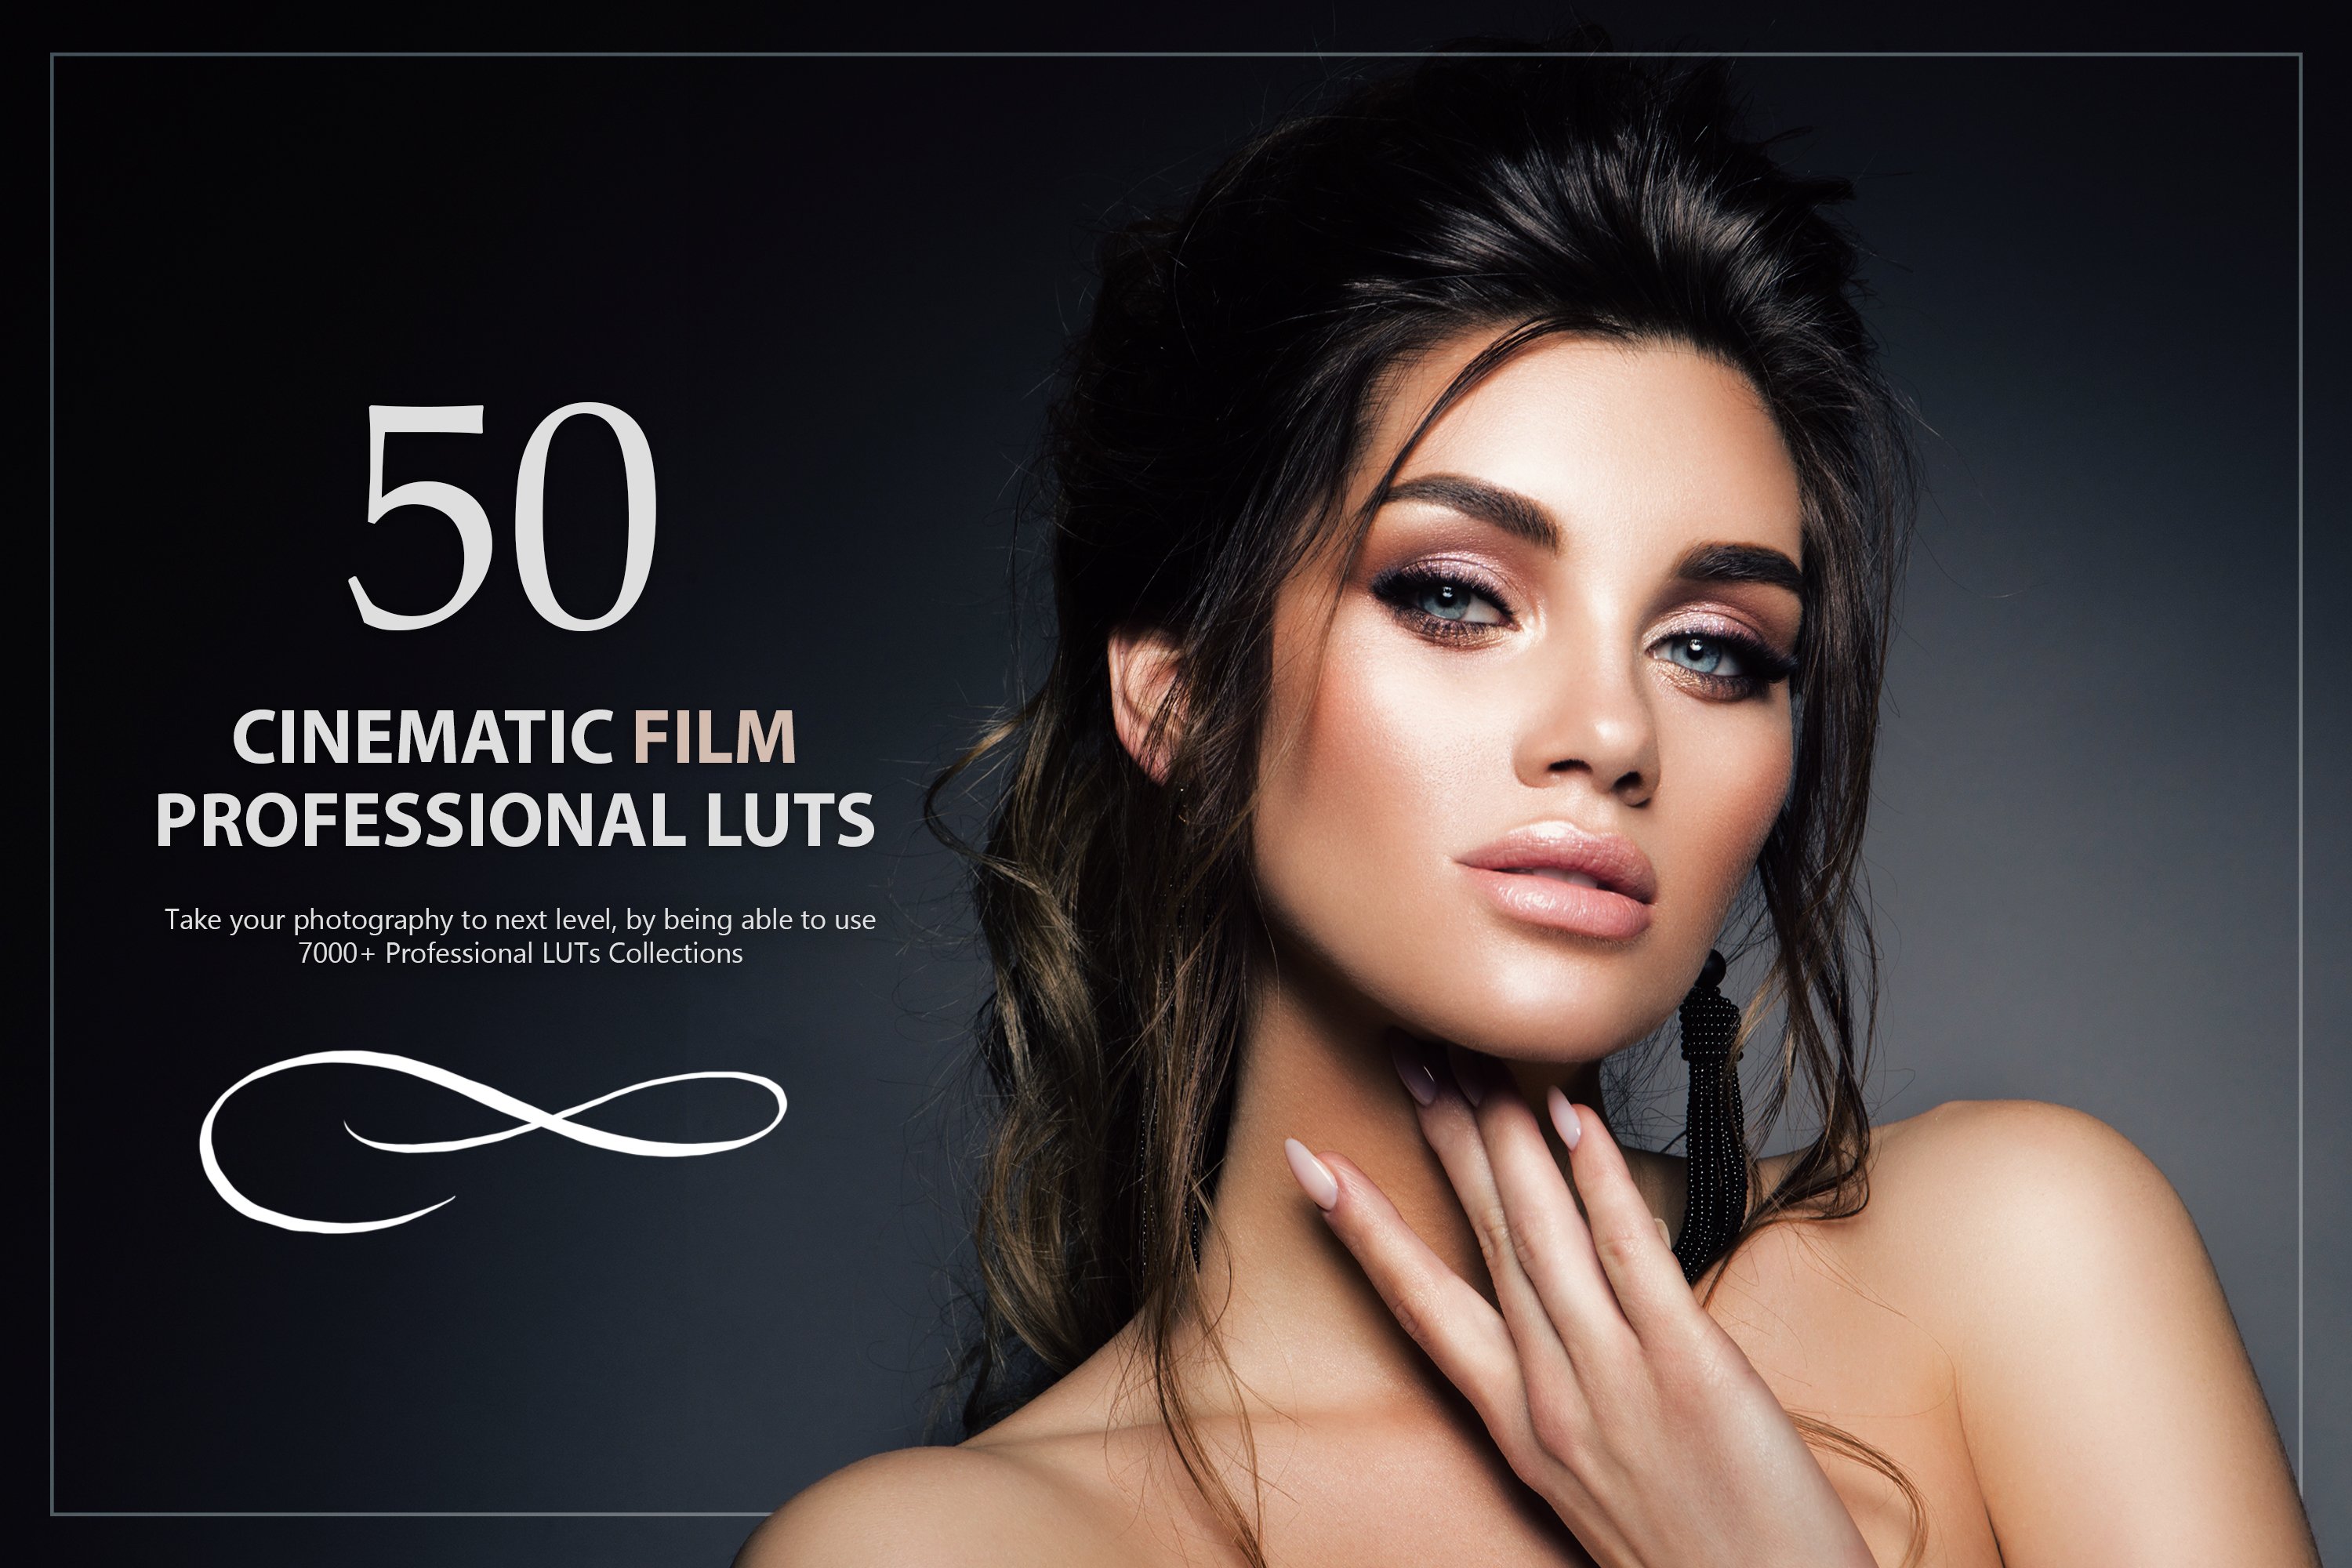 50 Cinematic Film LUTs Packcover image.